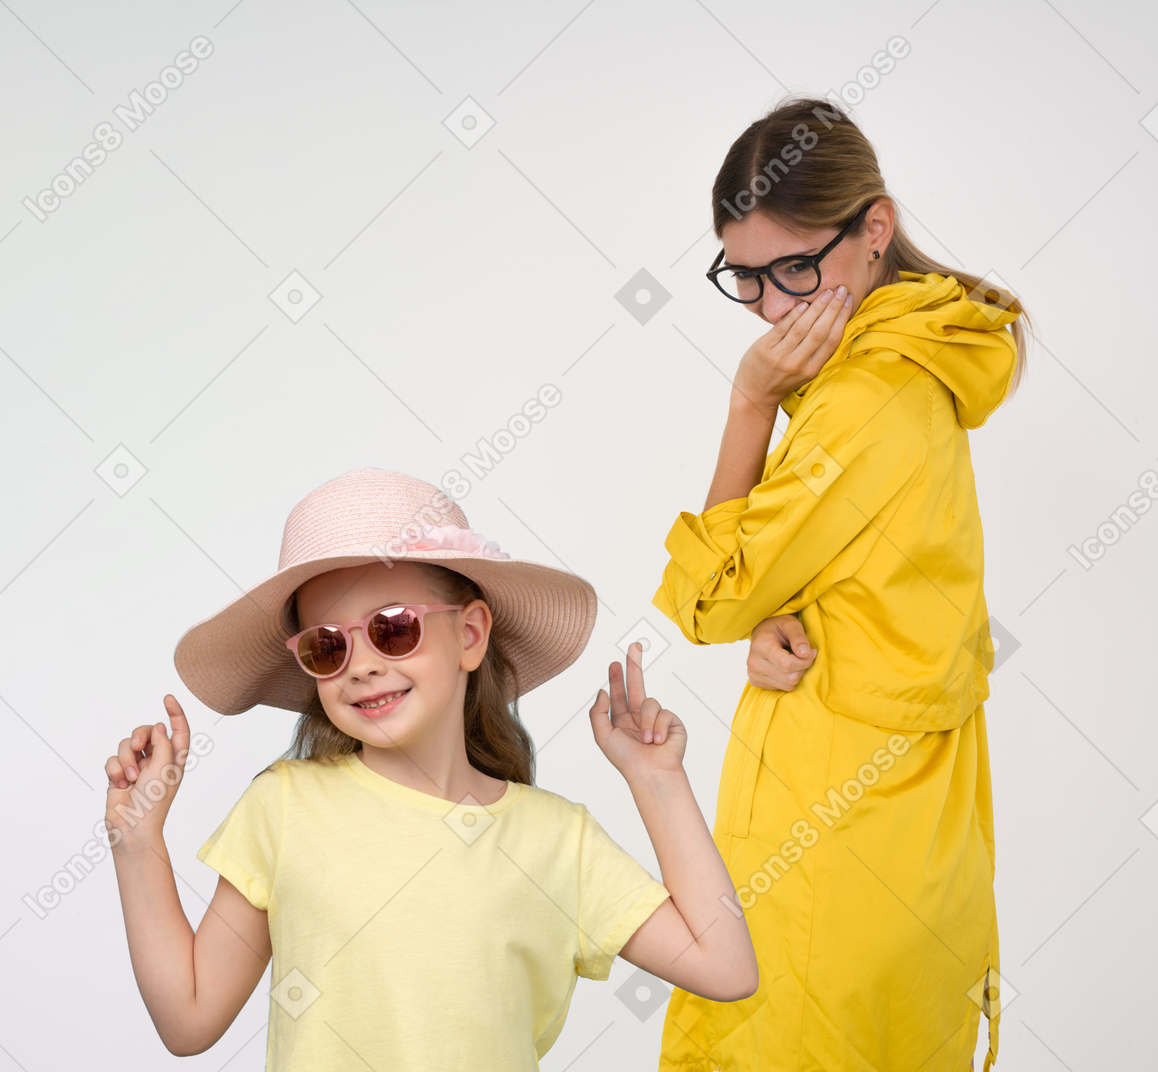 Mom looking at her daughter fashion choice